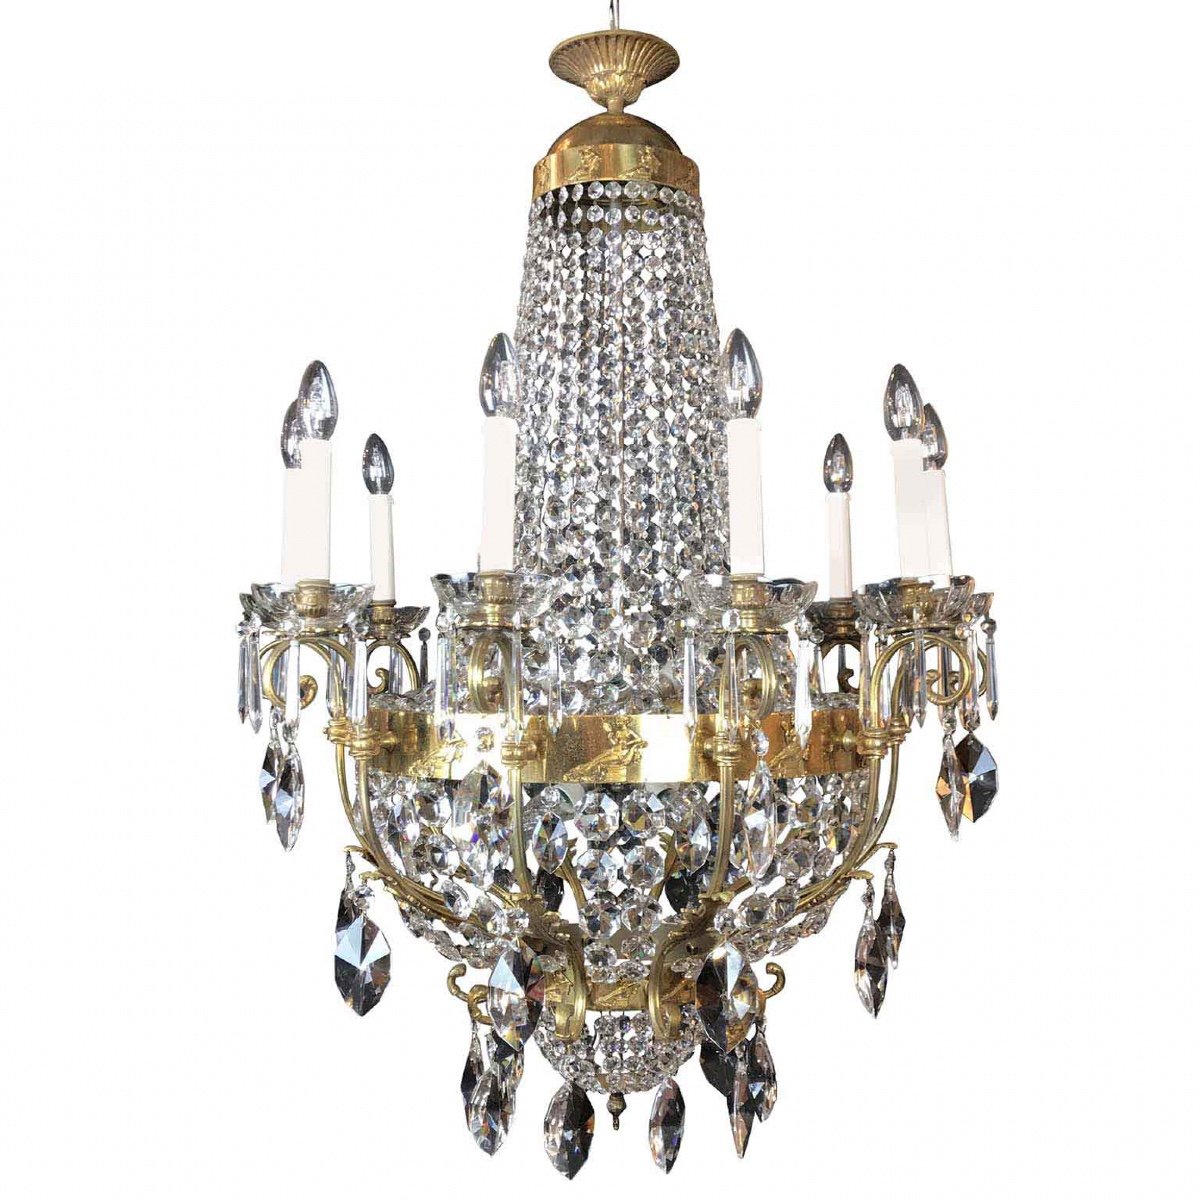 20th Century Italian Neoclassical Style Crystal Chandelier With Roman Female Figures-photo-3